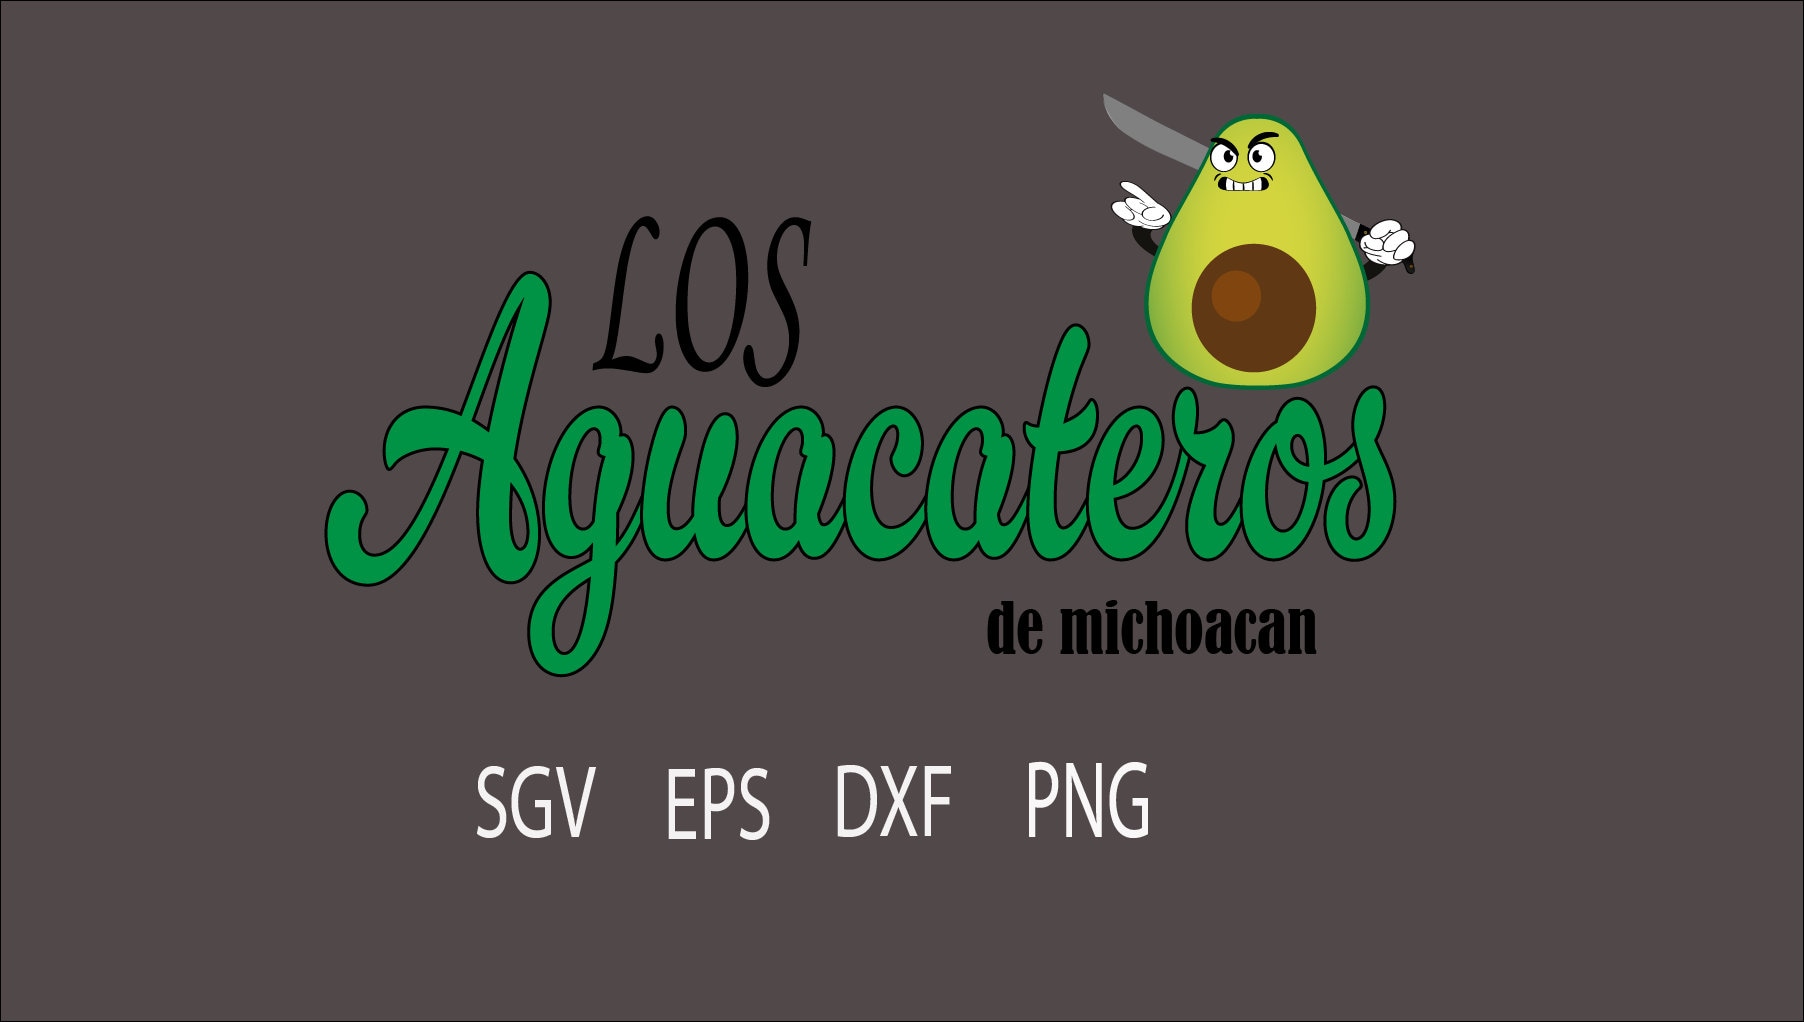 aguacateros mexico michoacan sgv eps dxf png